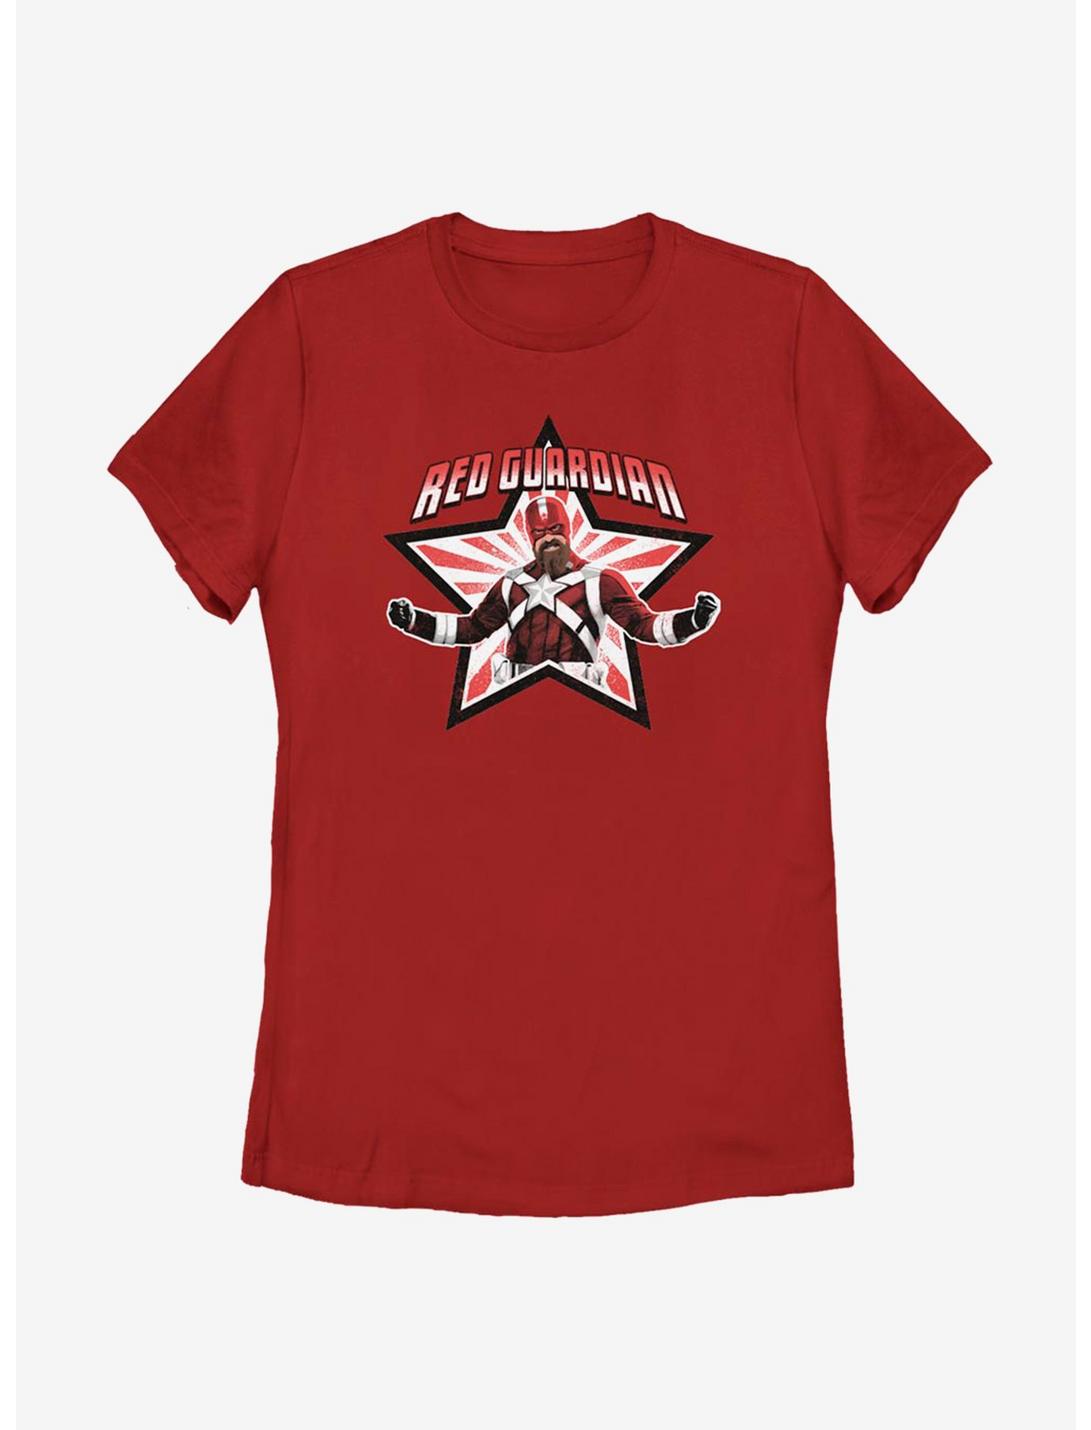 Marvel Black Widow Red Star Womens T-Shirt, RED, hi-res